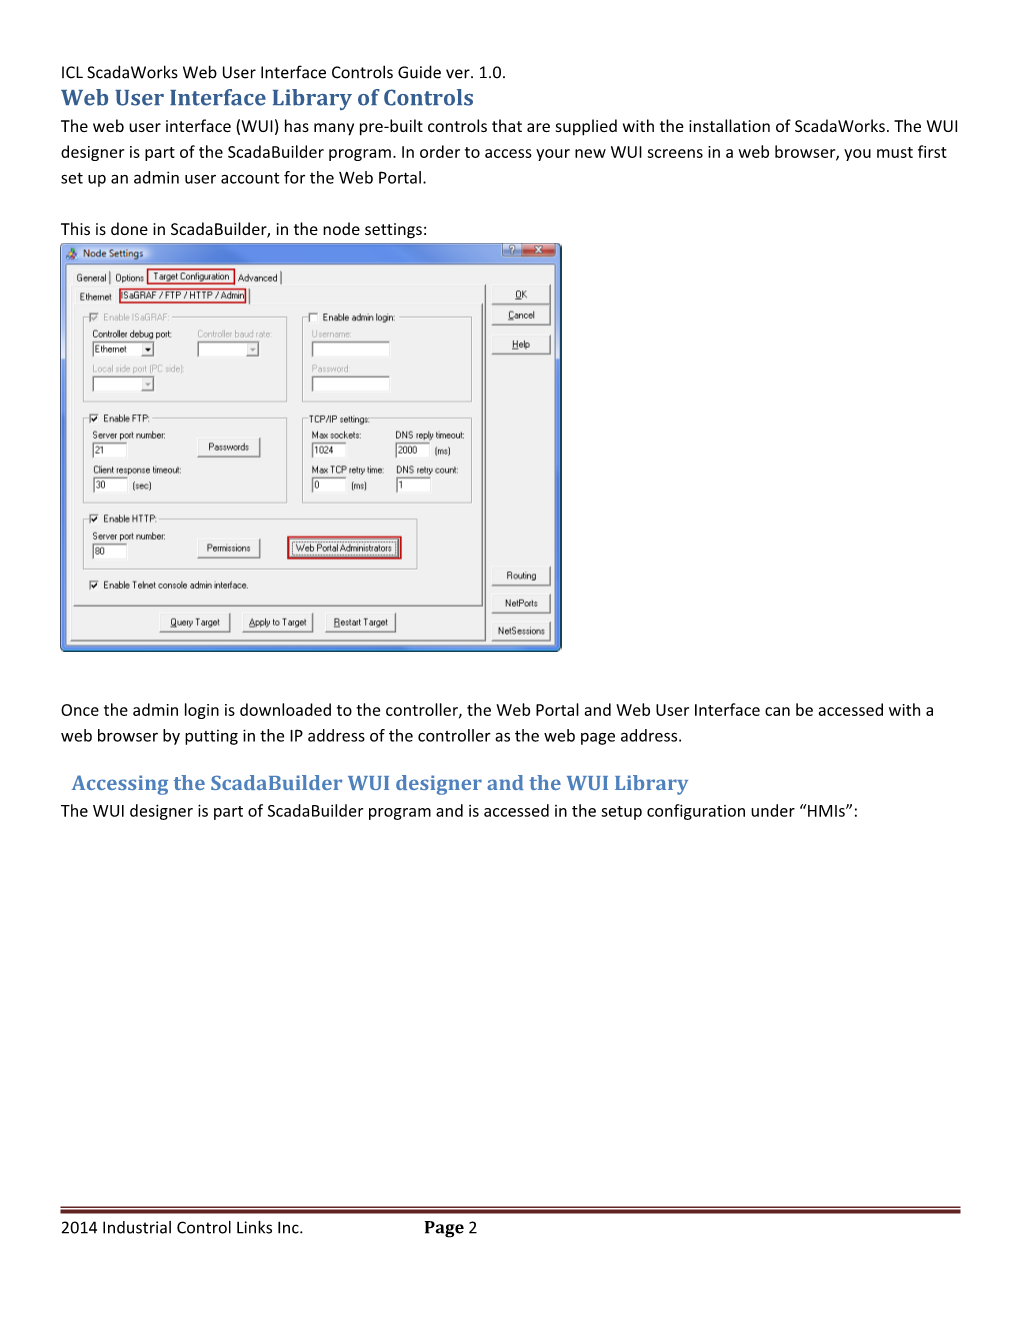 ICL Scadaworks Web User Interface Controls Guide